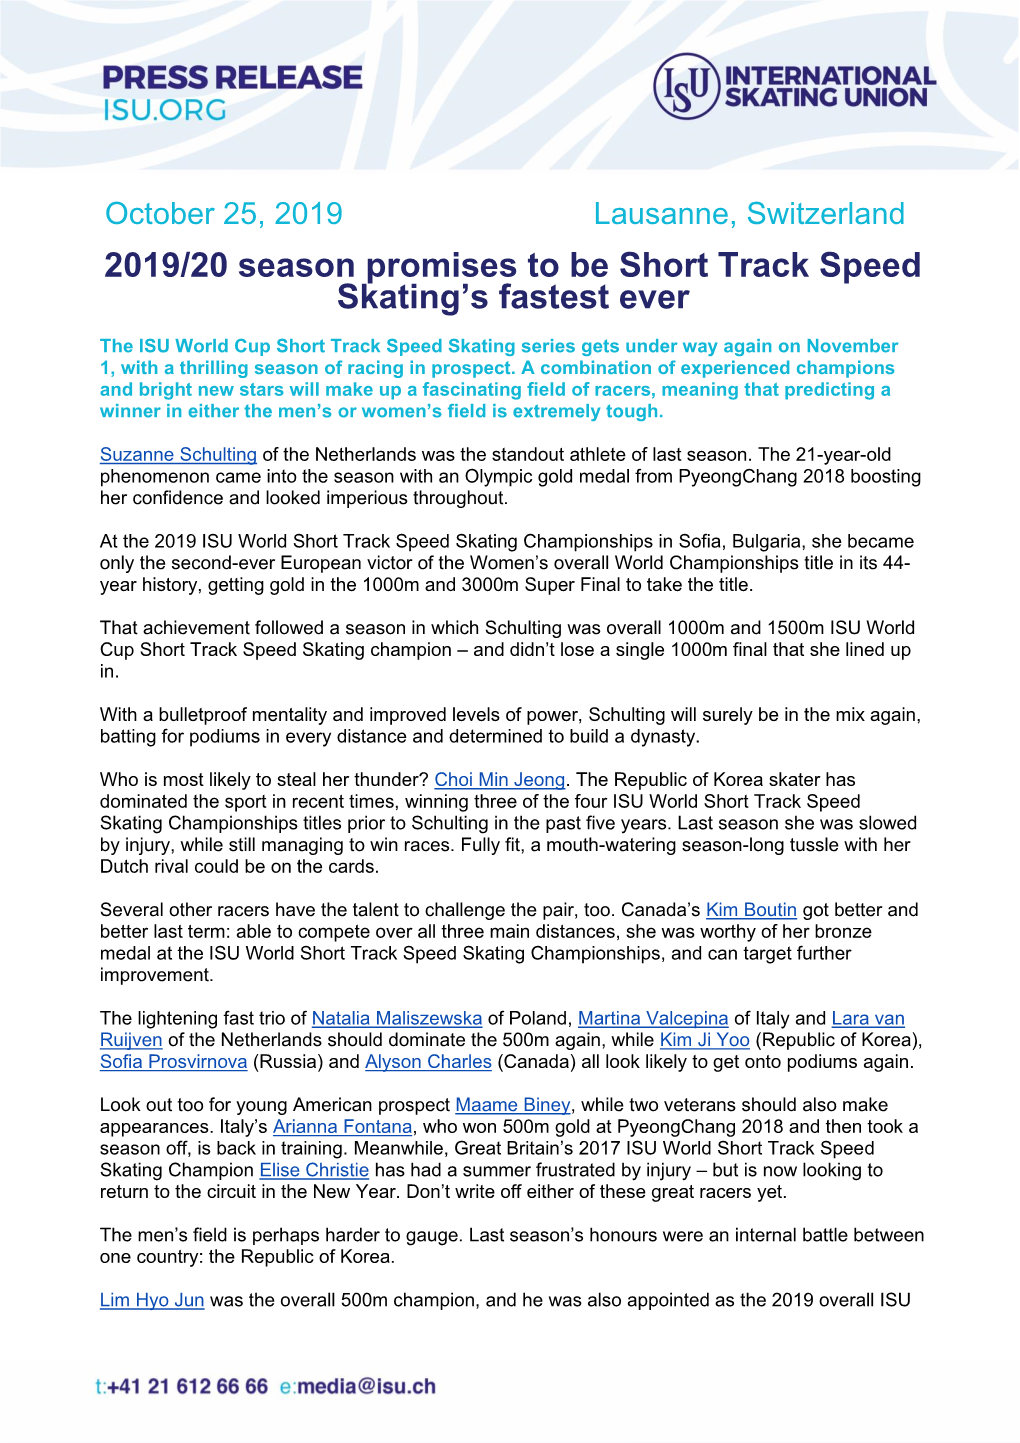 2019/20 Season Promises to Be Short Track Speed Skating’S Fastest Ever